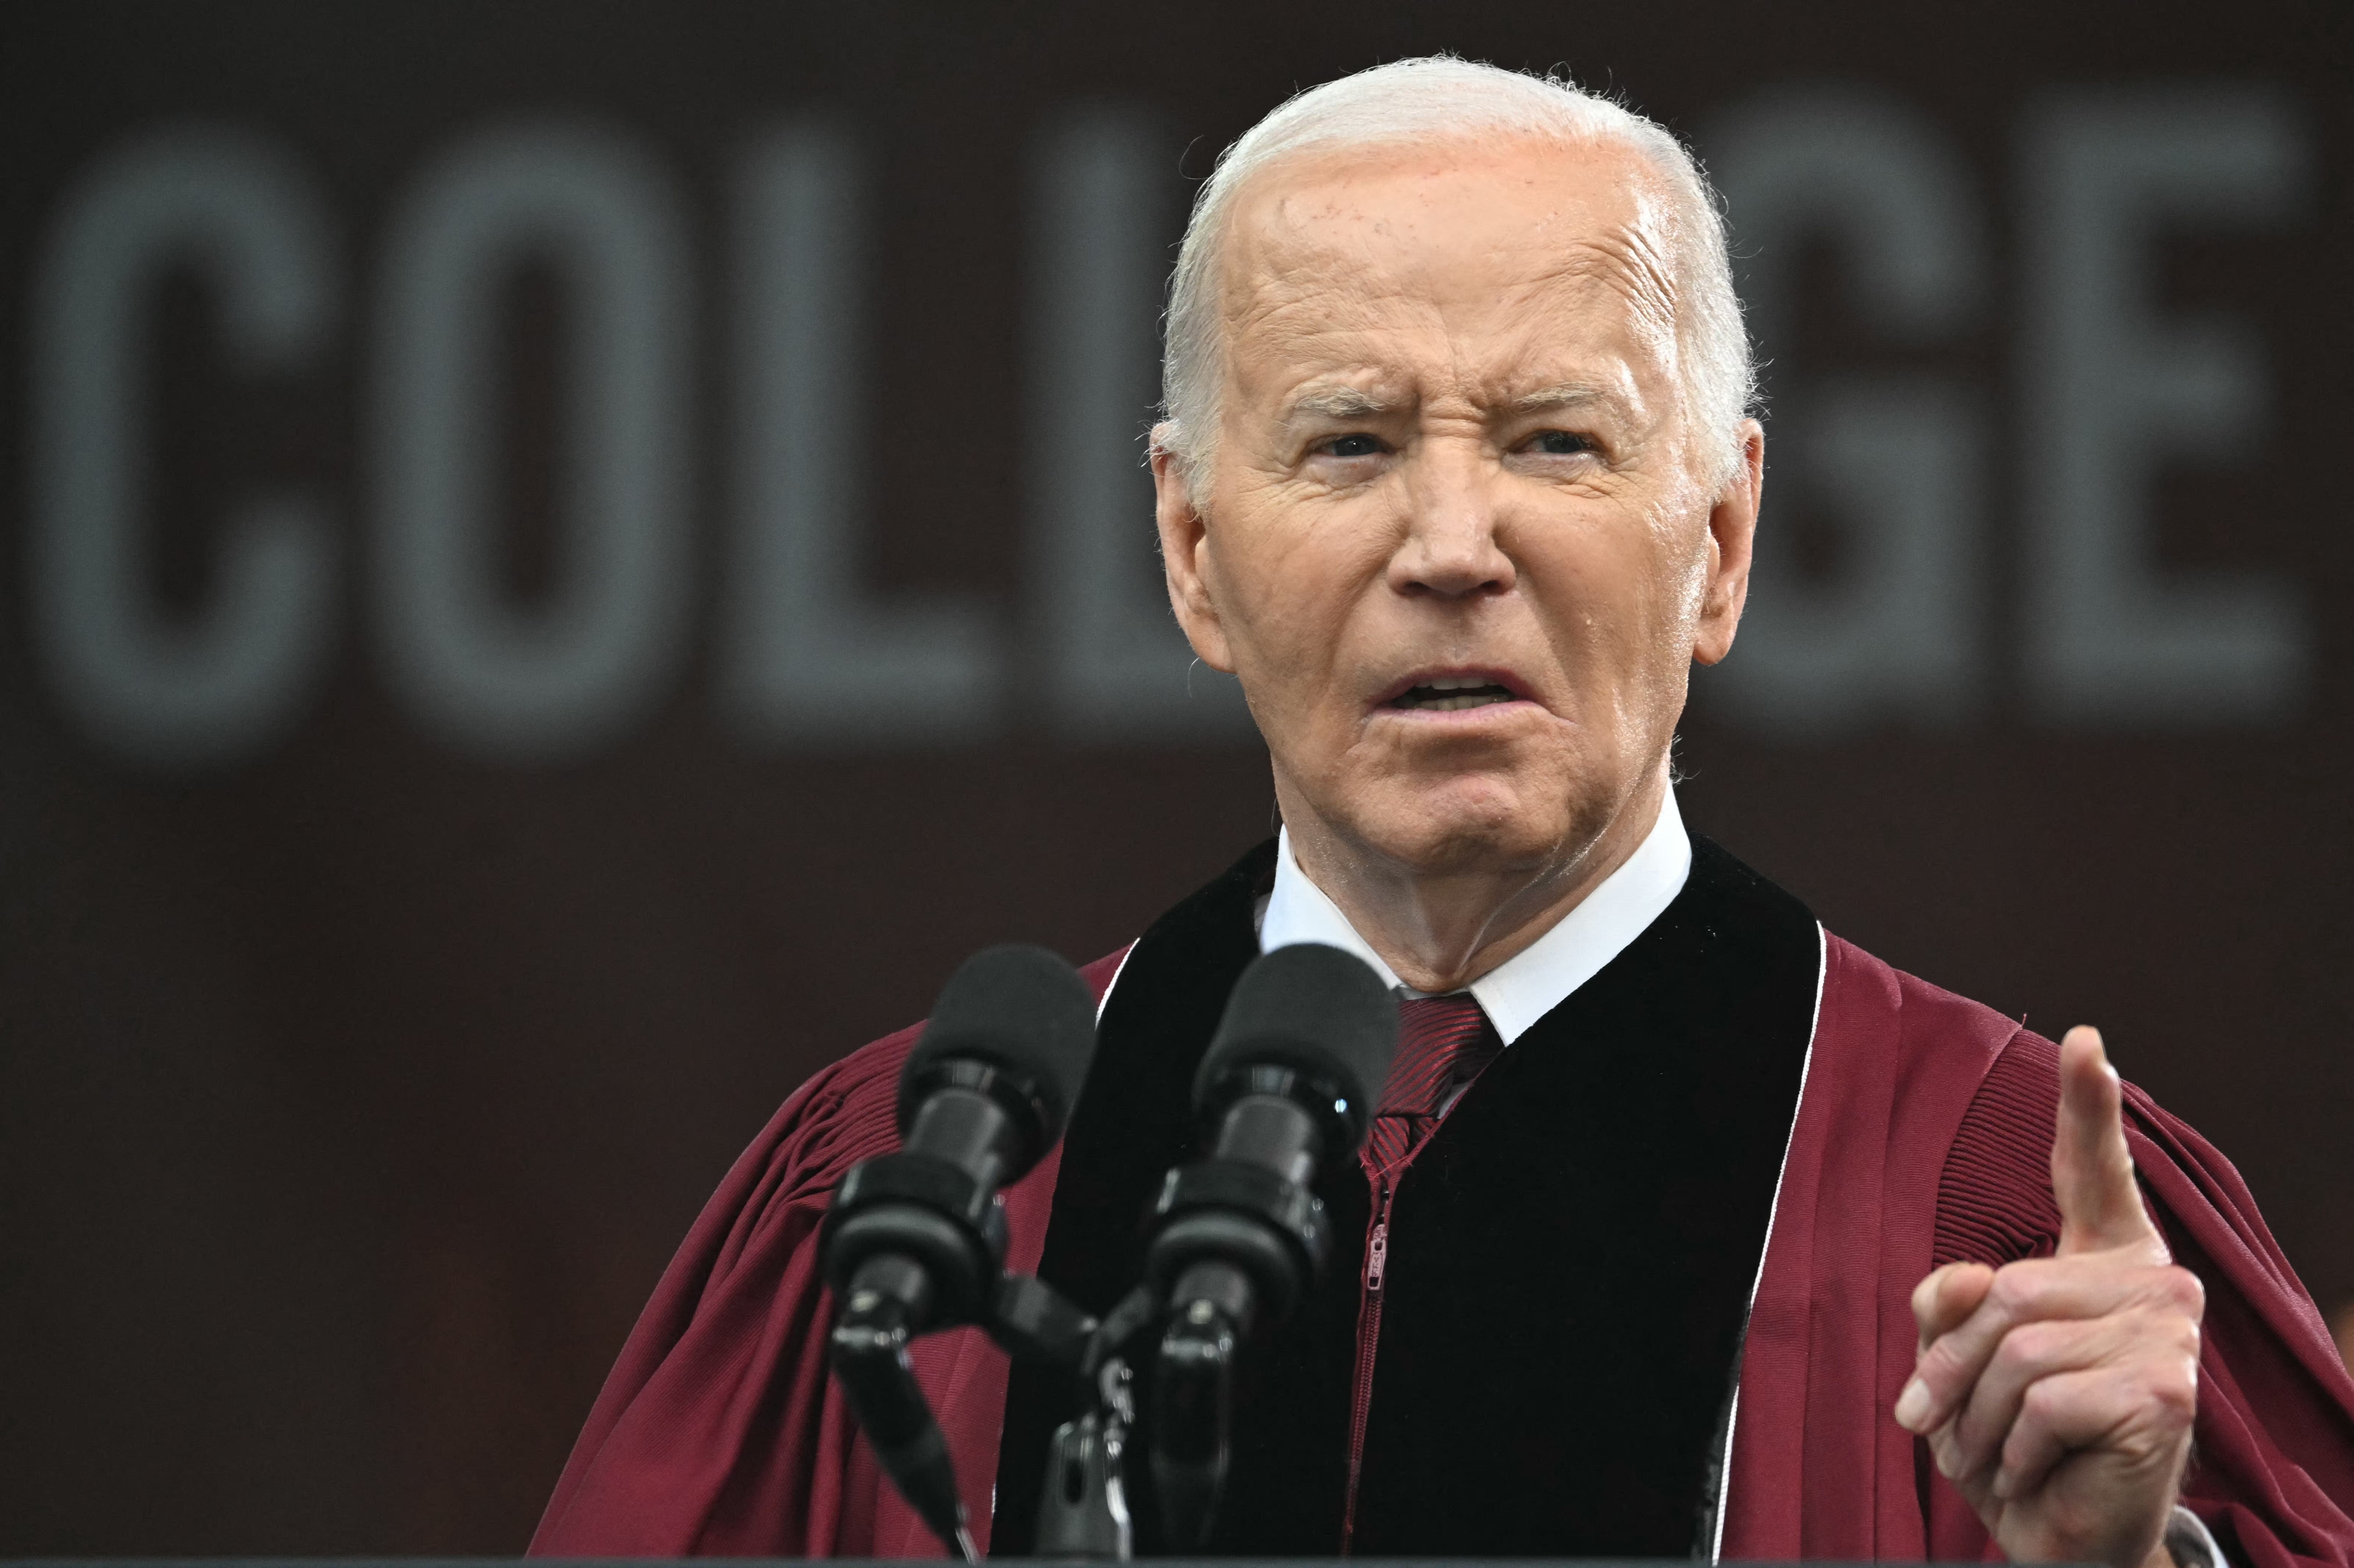 Democratic Republic of Congo flag behind Biden during his Morehouse address explained